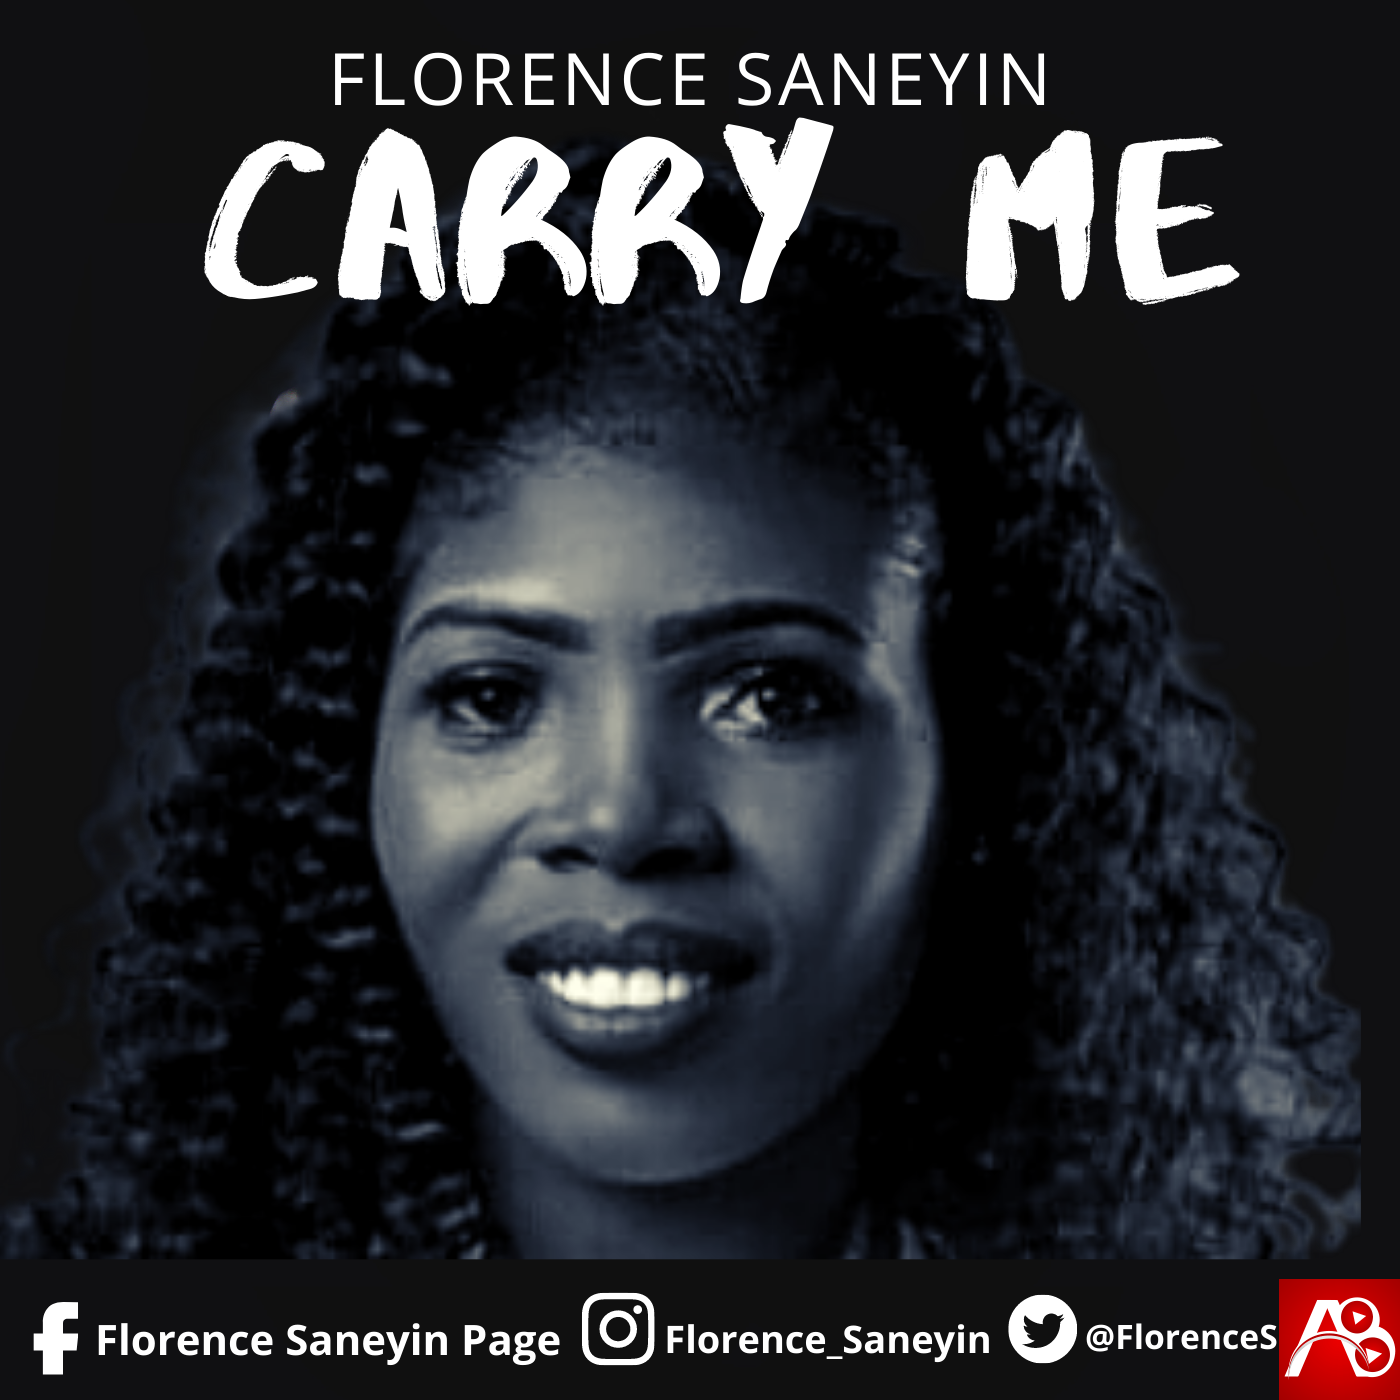 CARRY ME by Florence Saneyin